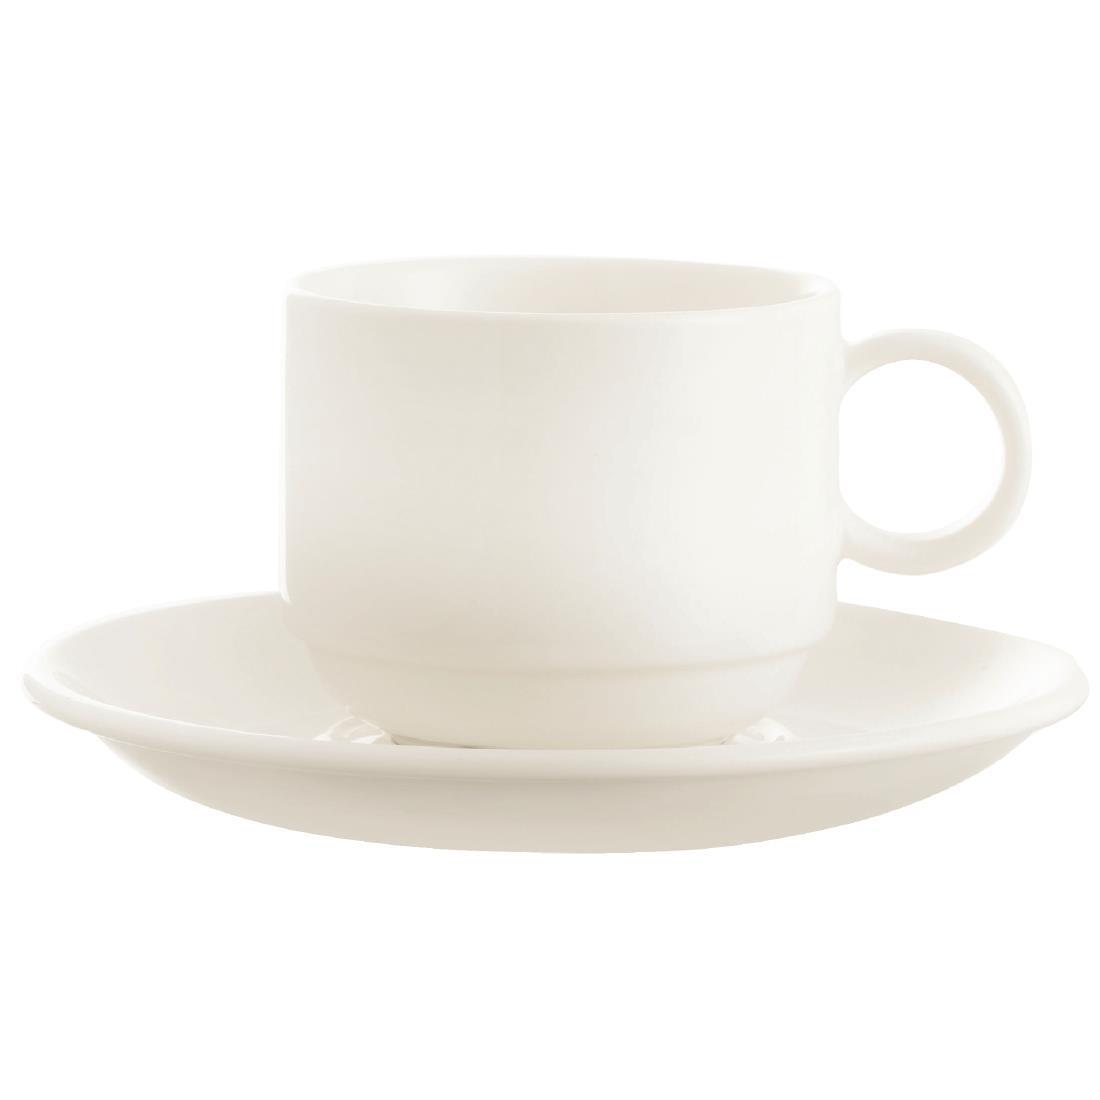 Arcoroc Zenix Large Double Well Saucers 150mm (Pack of 24) - GC758  - 1